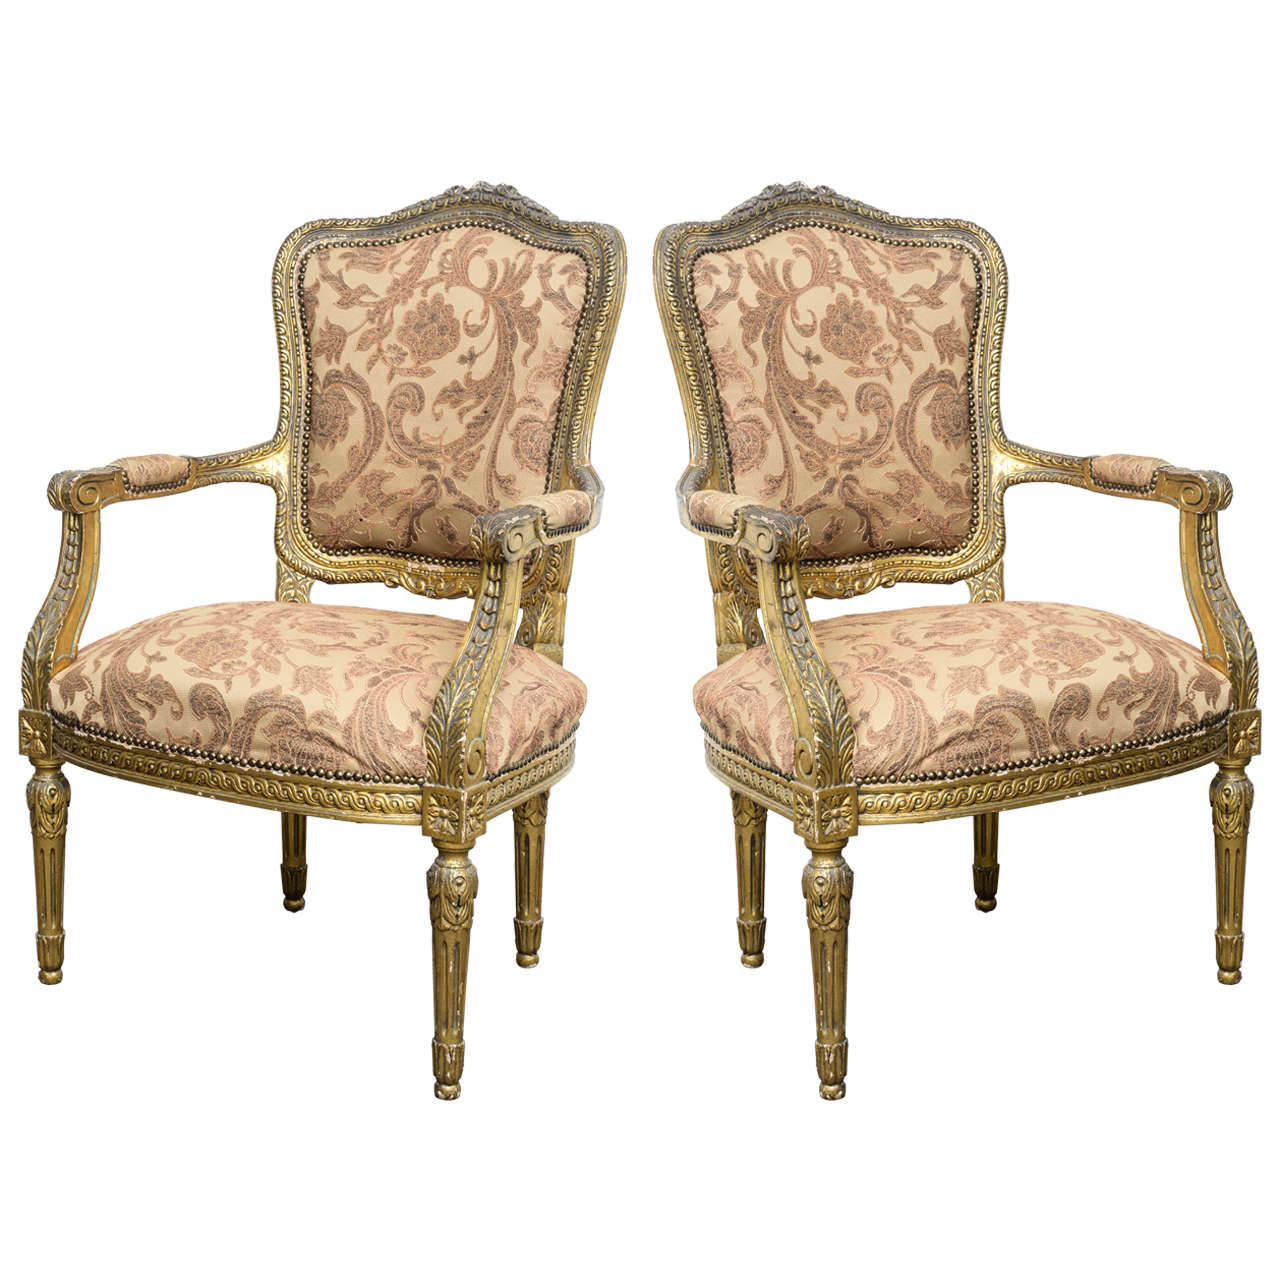 Pair of Antique French Gilt Armchairs